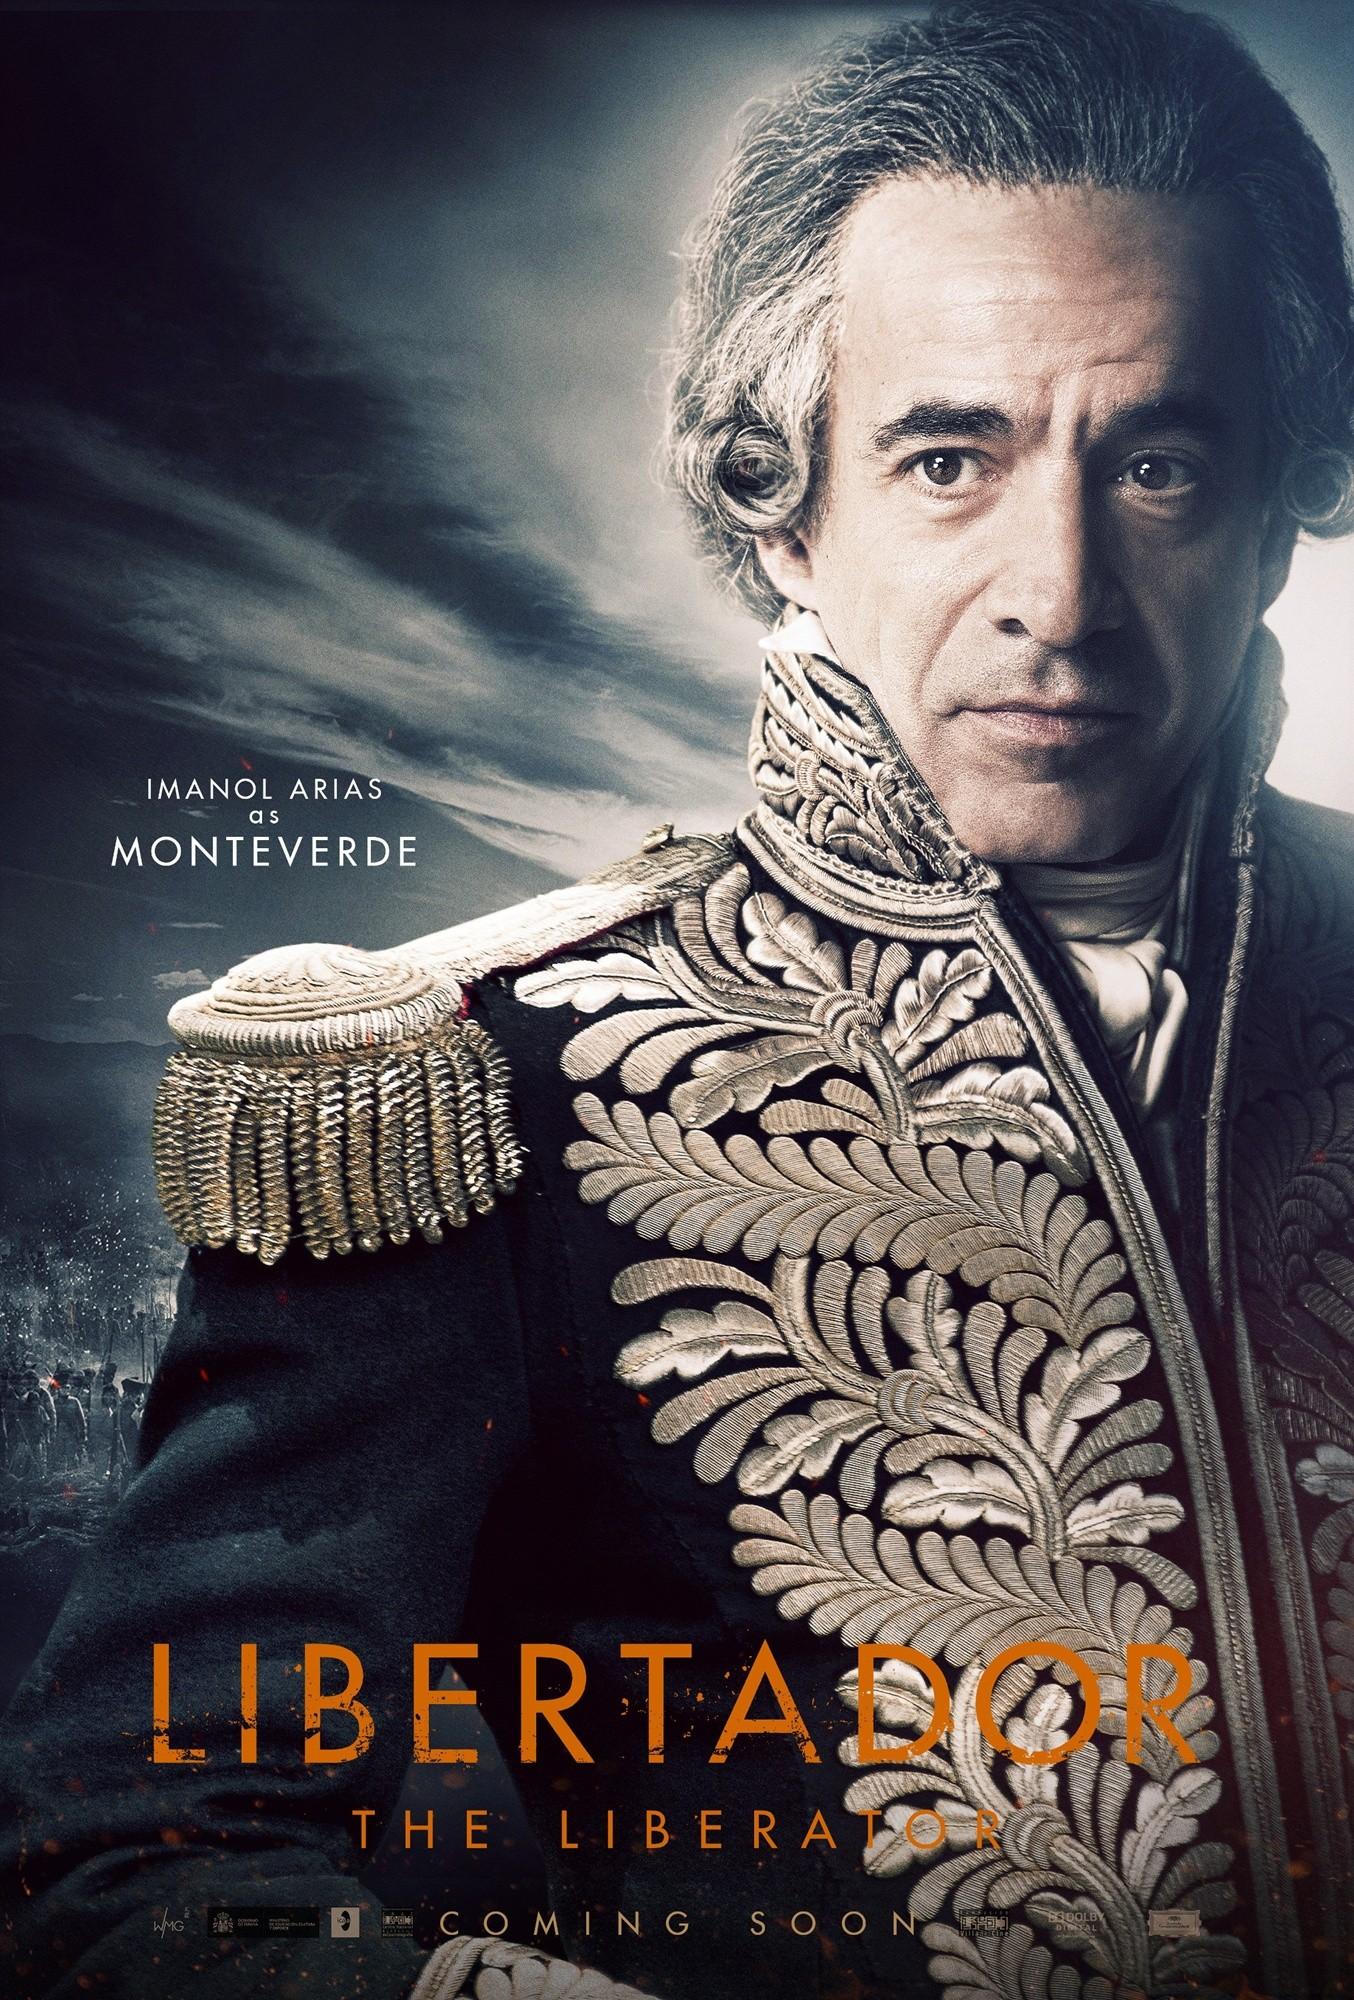 The Liberator (2014) Pictures, Trailer, Reviews, News, DVD and Soundtrack